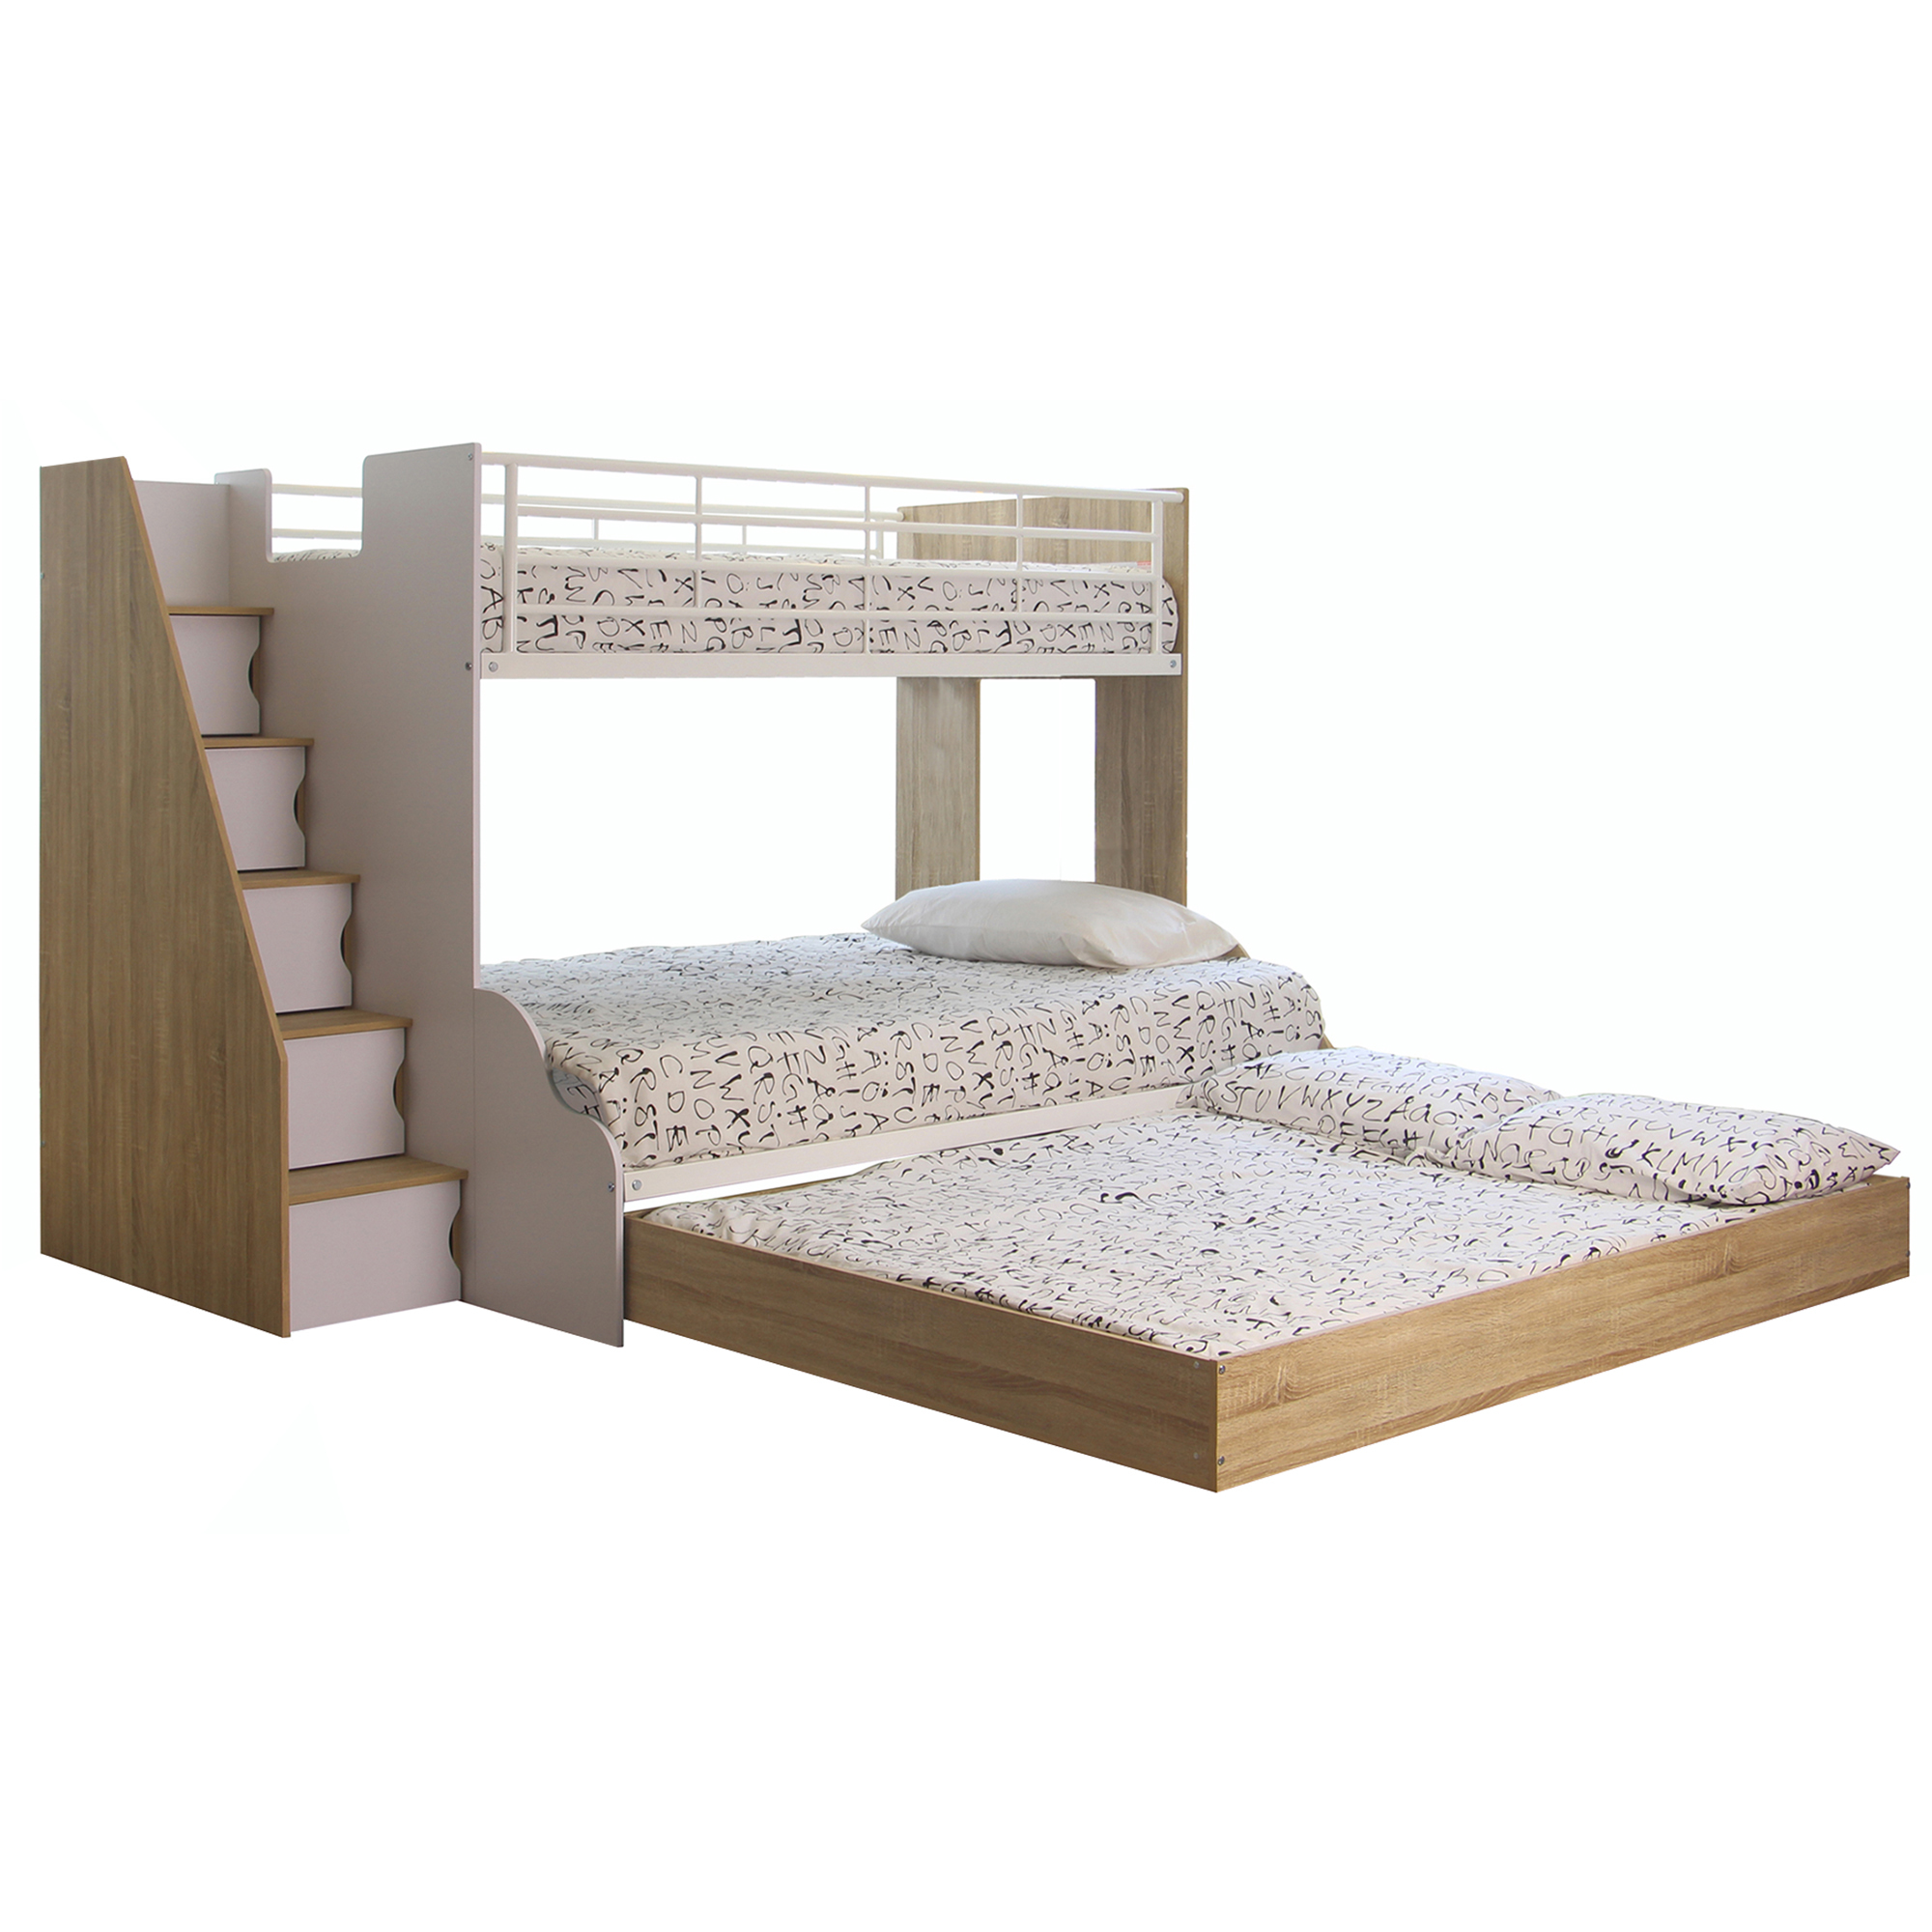 Vic Furniture Sonoma Levin Single Over, Double Over Double Bunk Beds With Stairs